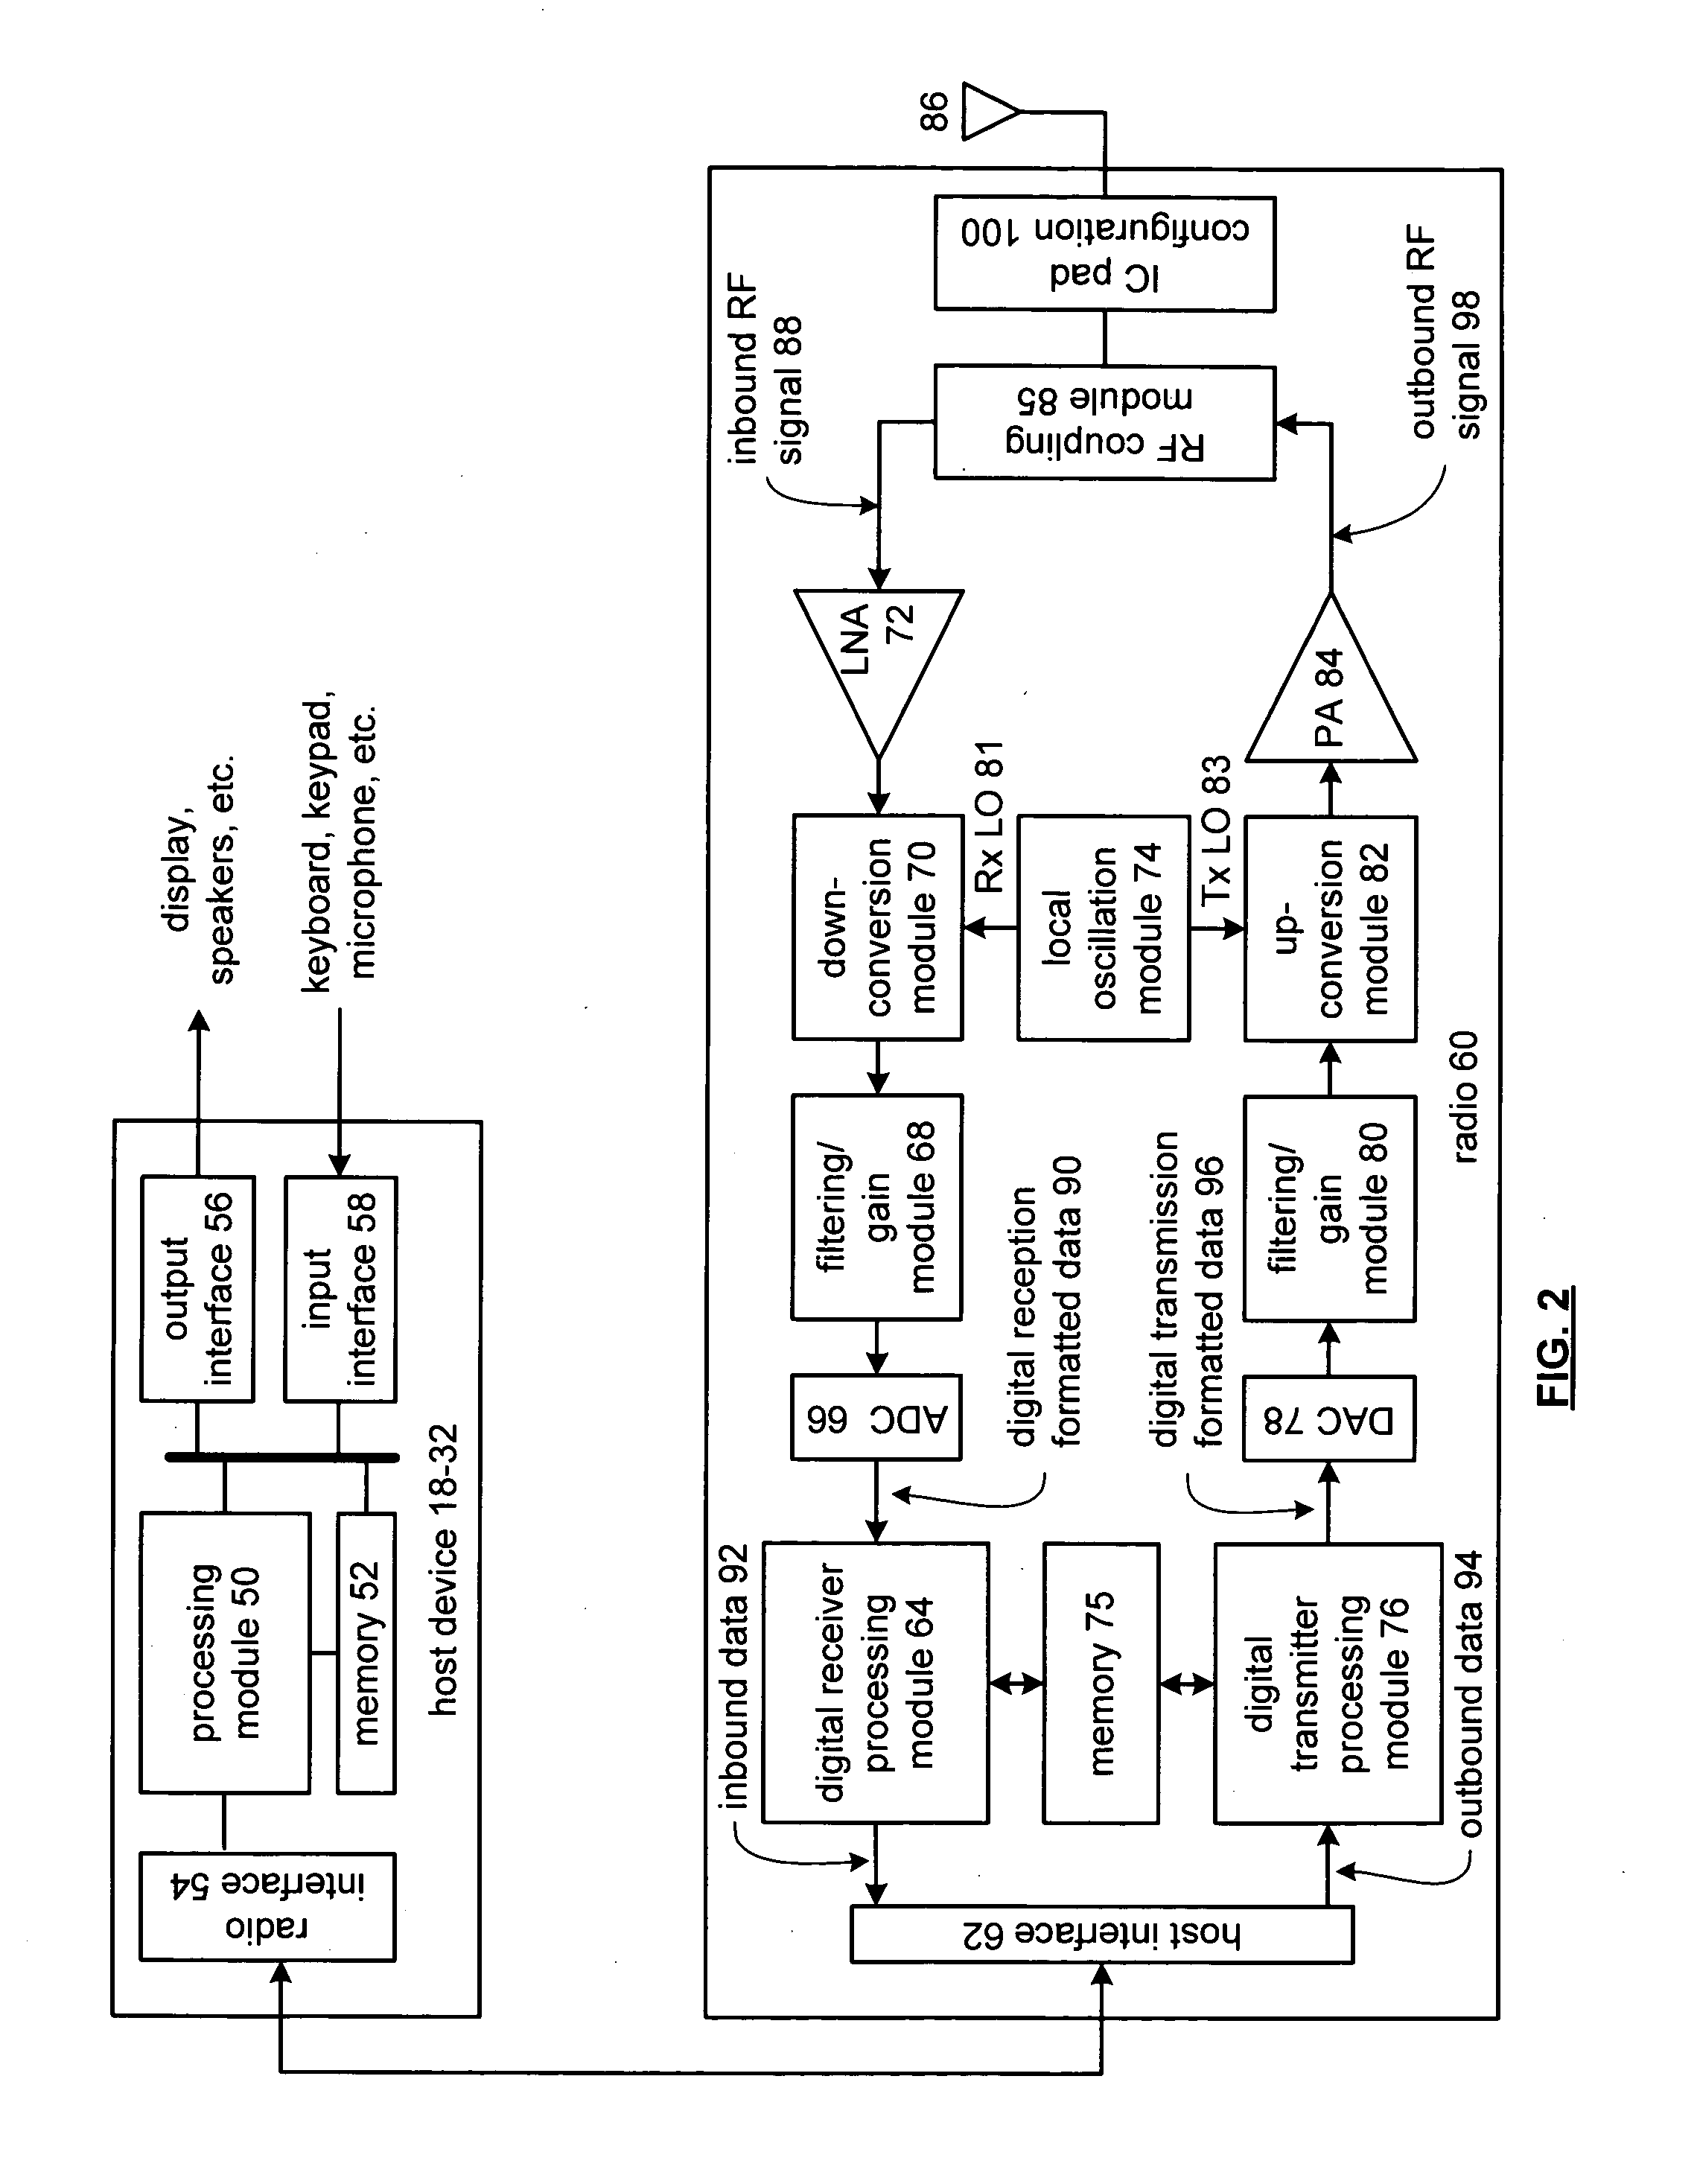 High frequency integrated circuit pad configuration including ESD protection circuitry